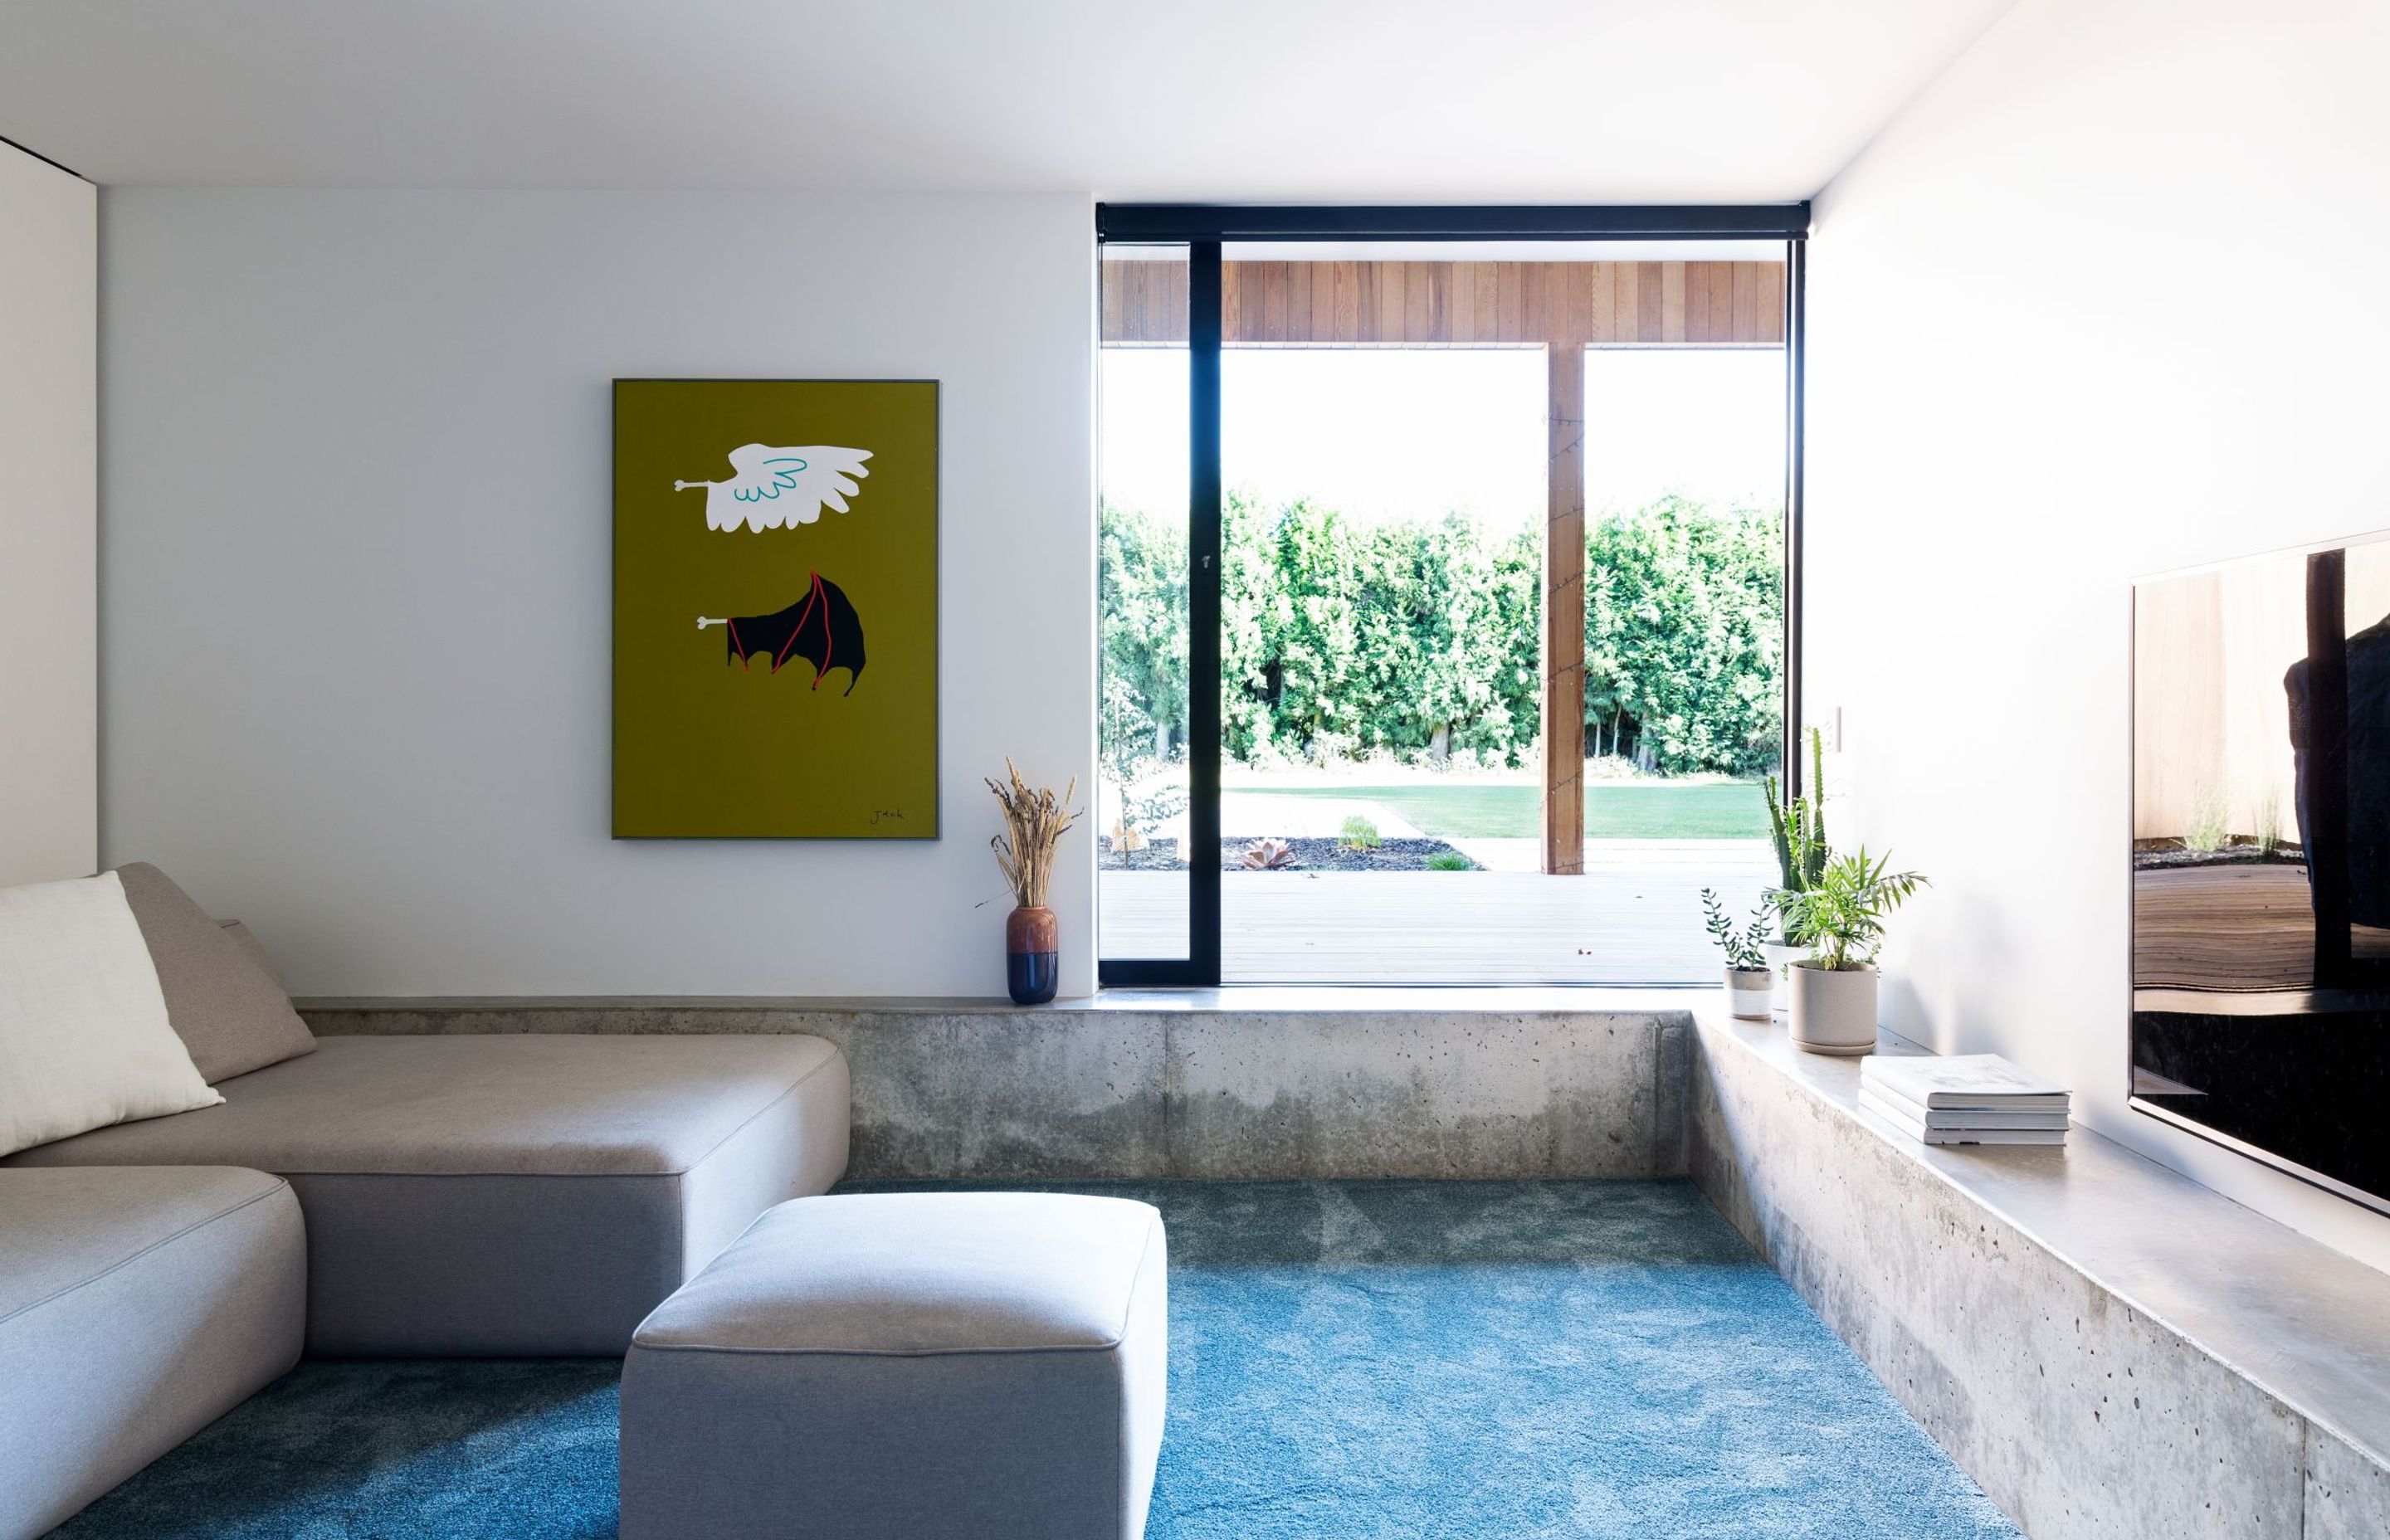 The sunken lounge features built-in concrete seating, exposing some of the structure of the home.